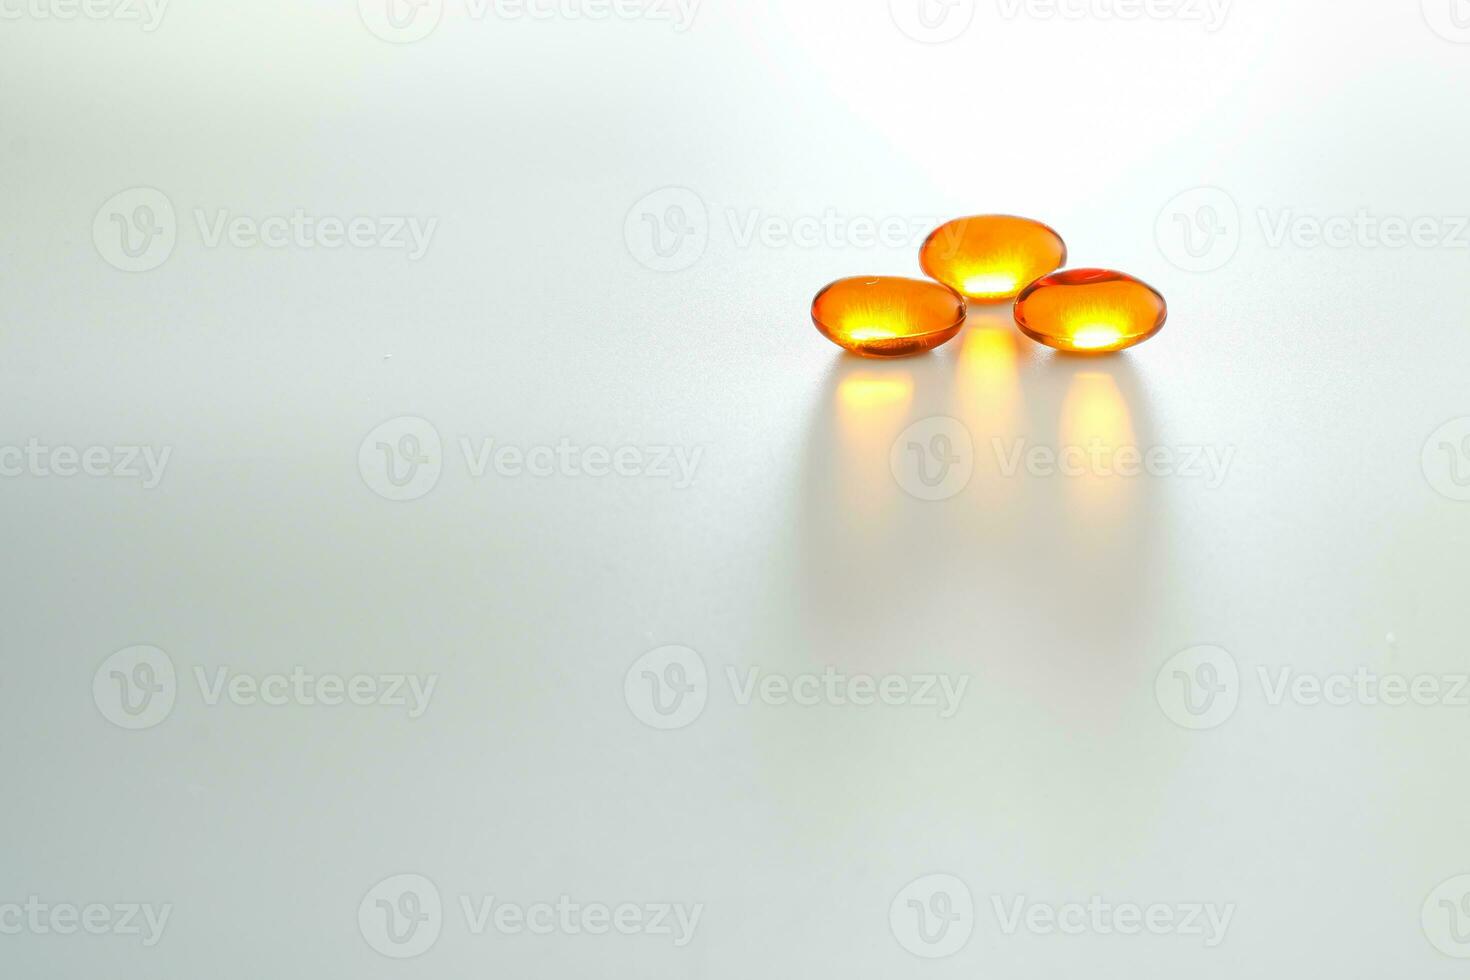 Soft gel, Close up of oil filled capsules, suitable for presenting food supplements, fish oil, omega 3, omega 6, omega 9, vitamin A, vitamin D, vitamin D3, vitamin E, evening primrose oil, photo